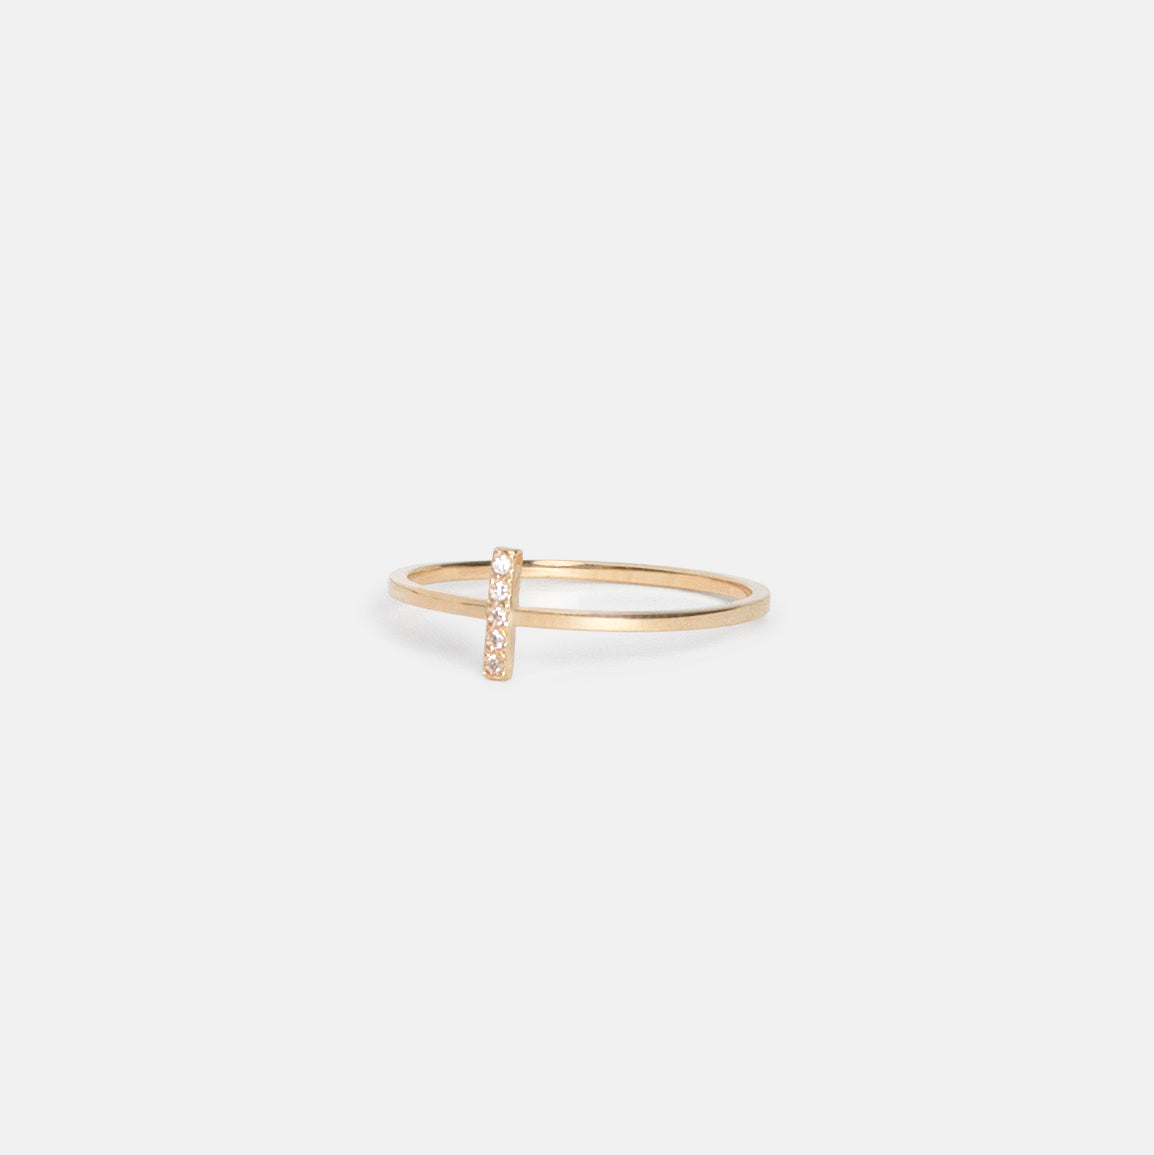 Stevi Thin Ring in 14k Gold set with White Diamonds by SHW Fine Jewelry